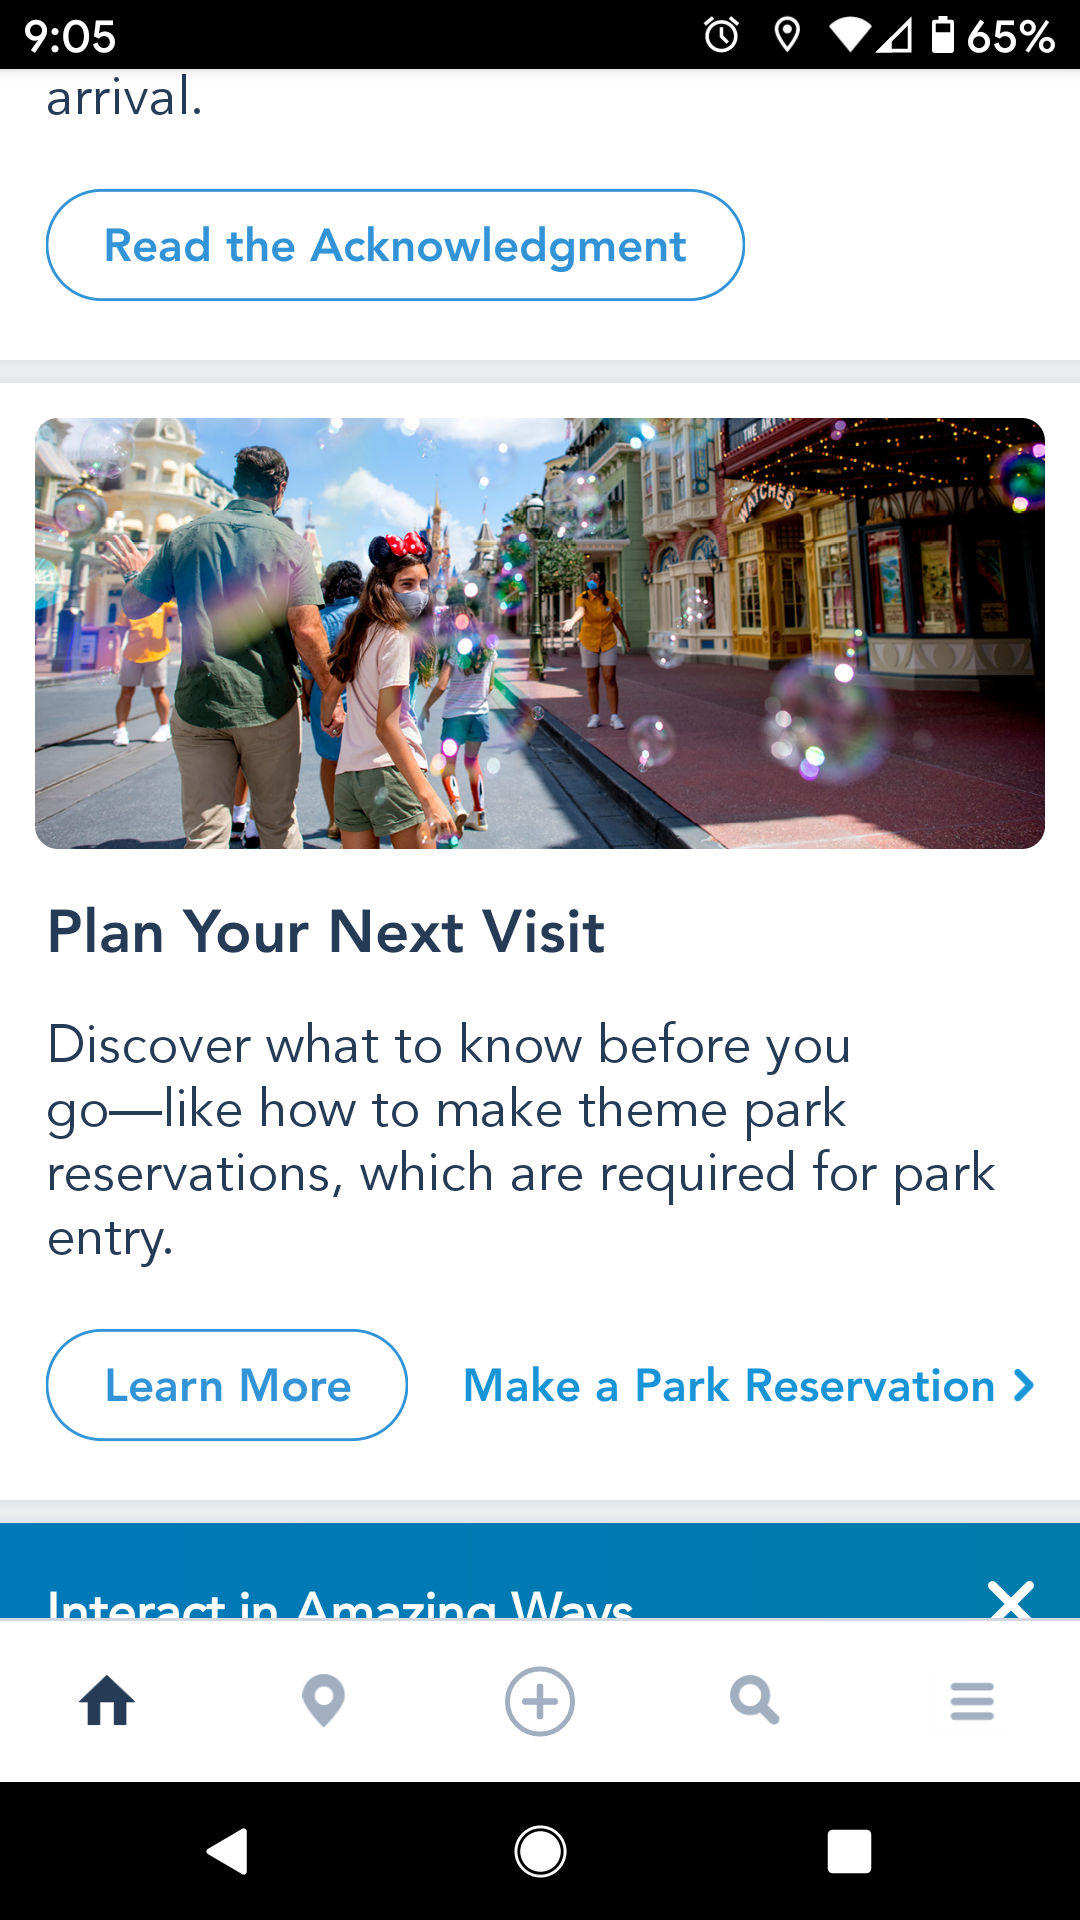 NEWS: The Disney World App Now Has a Link To Make Park Pass Reservations